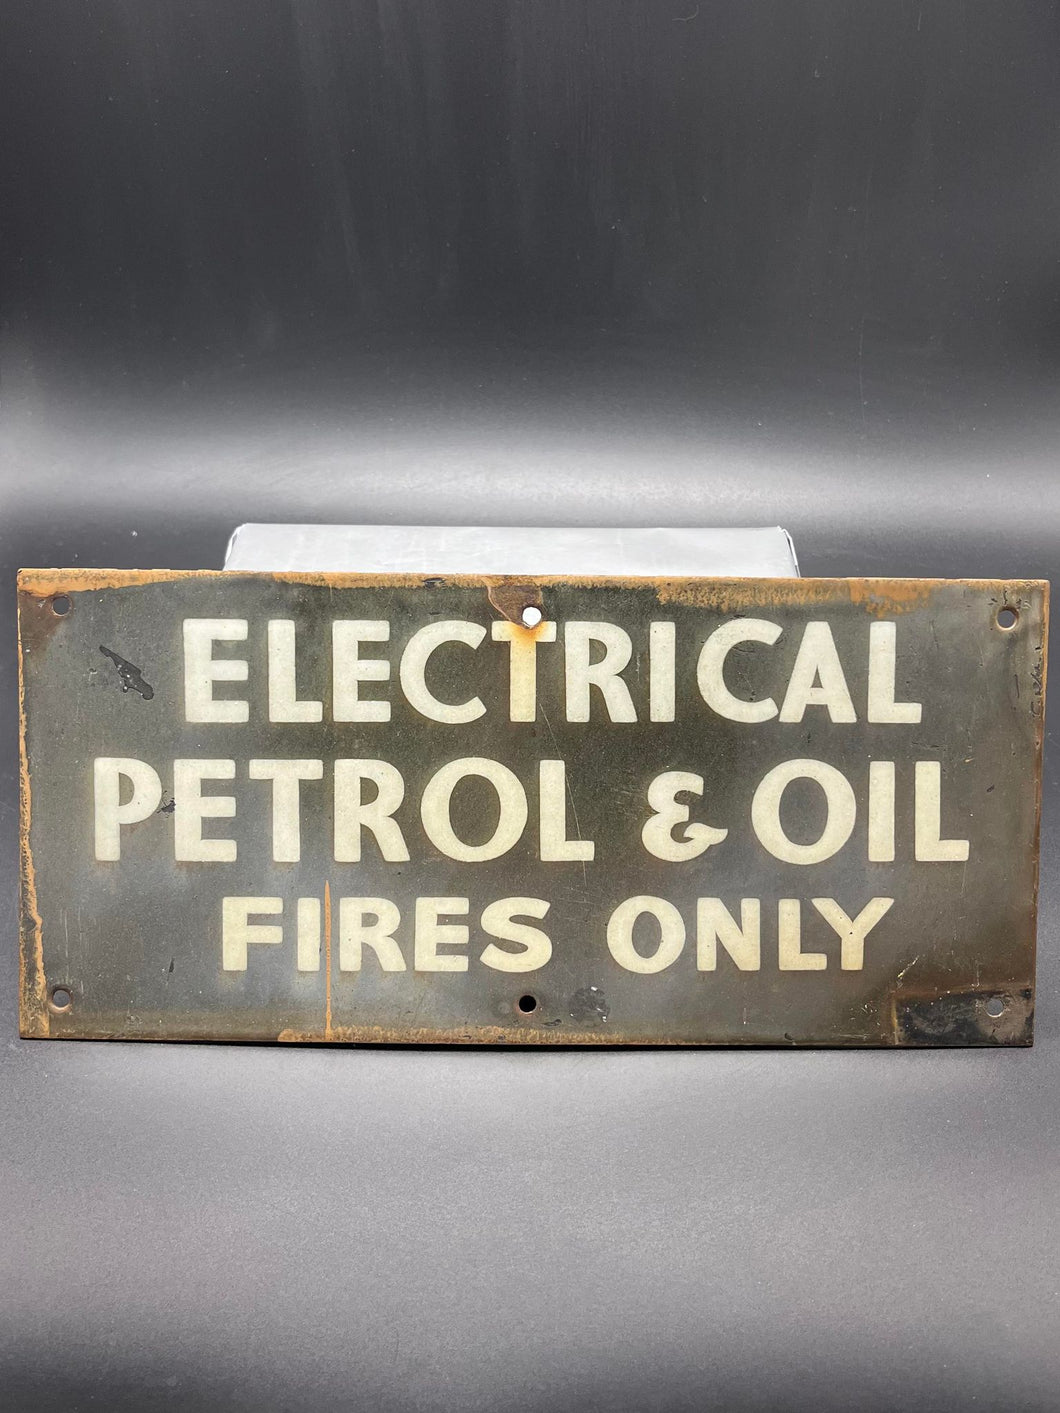 Electrical Petrol & Oil Fires Only Enamel Sign